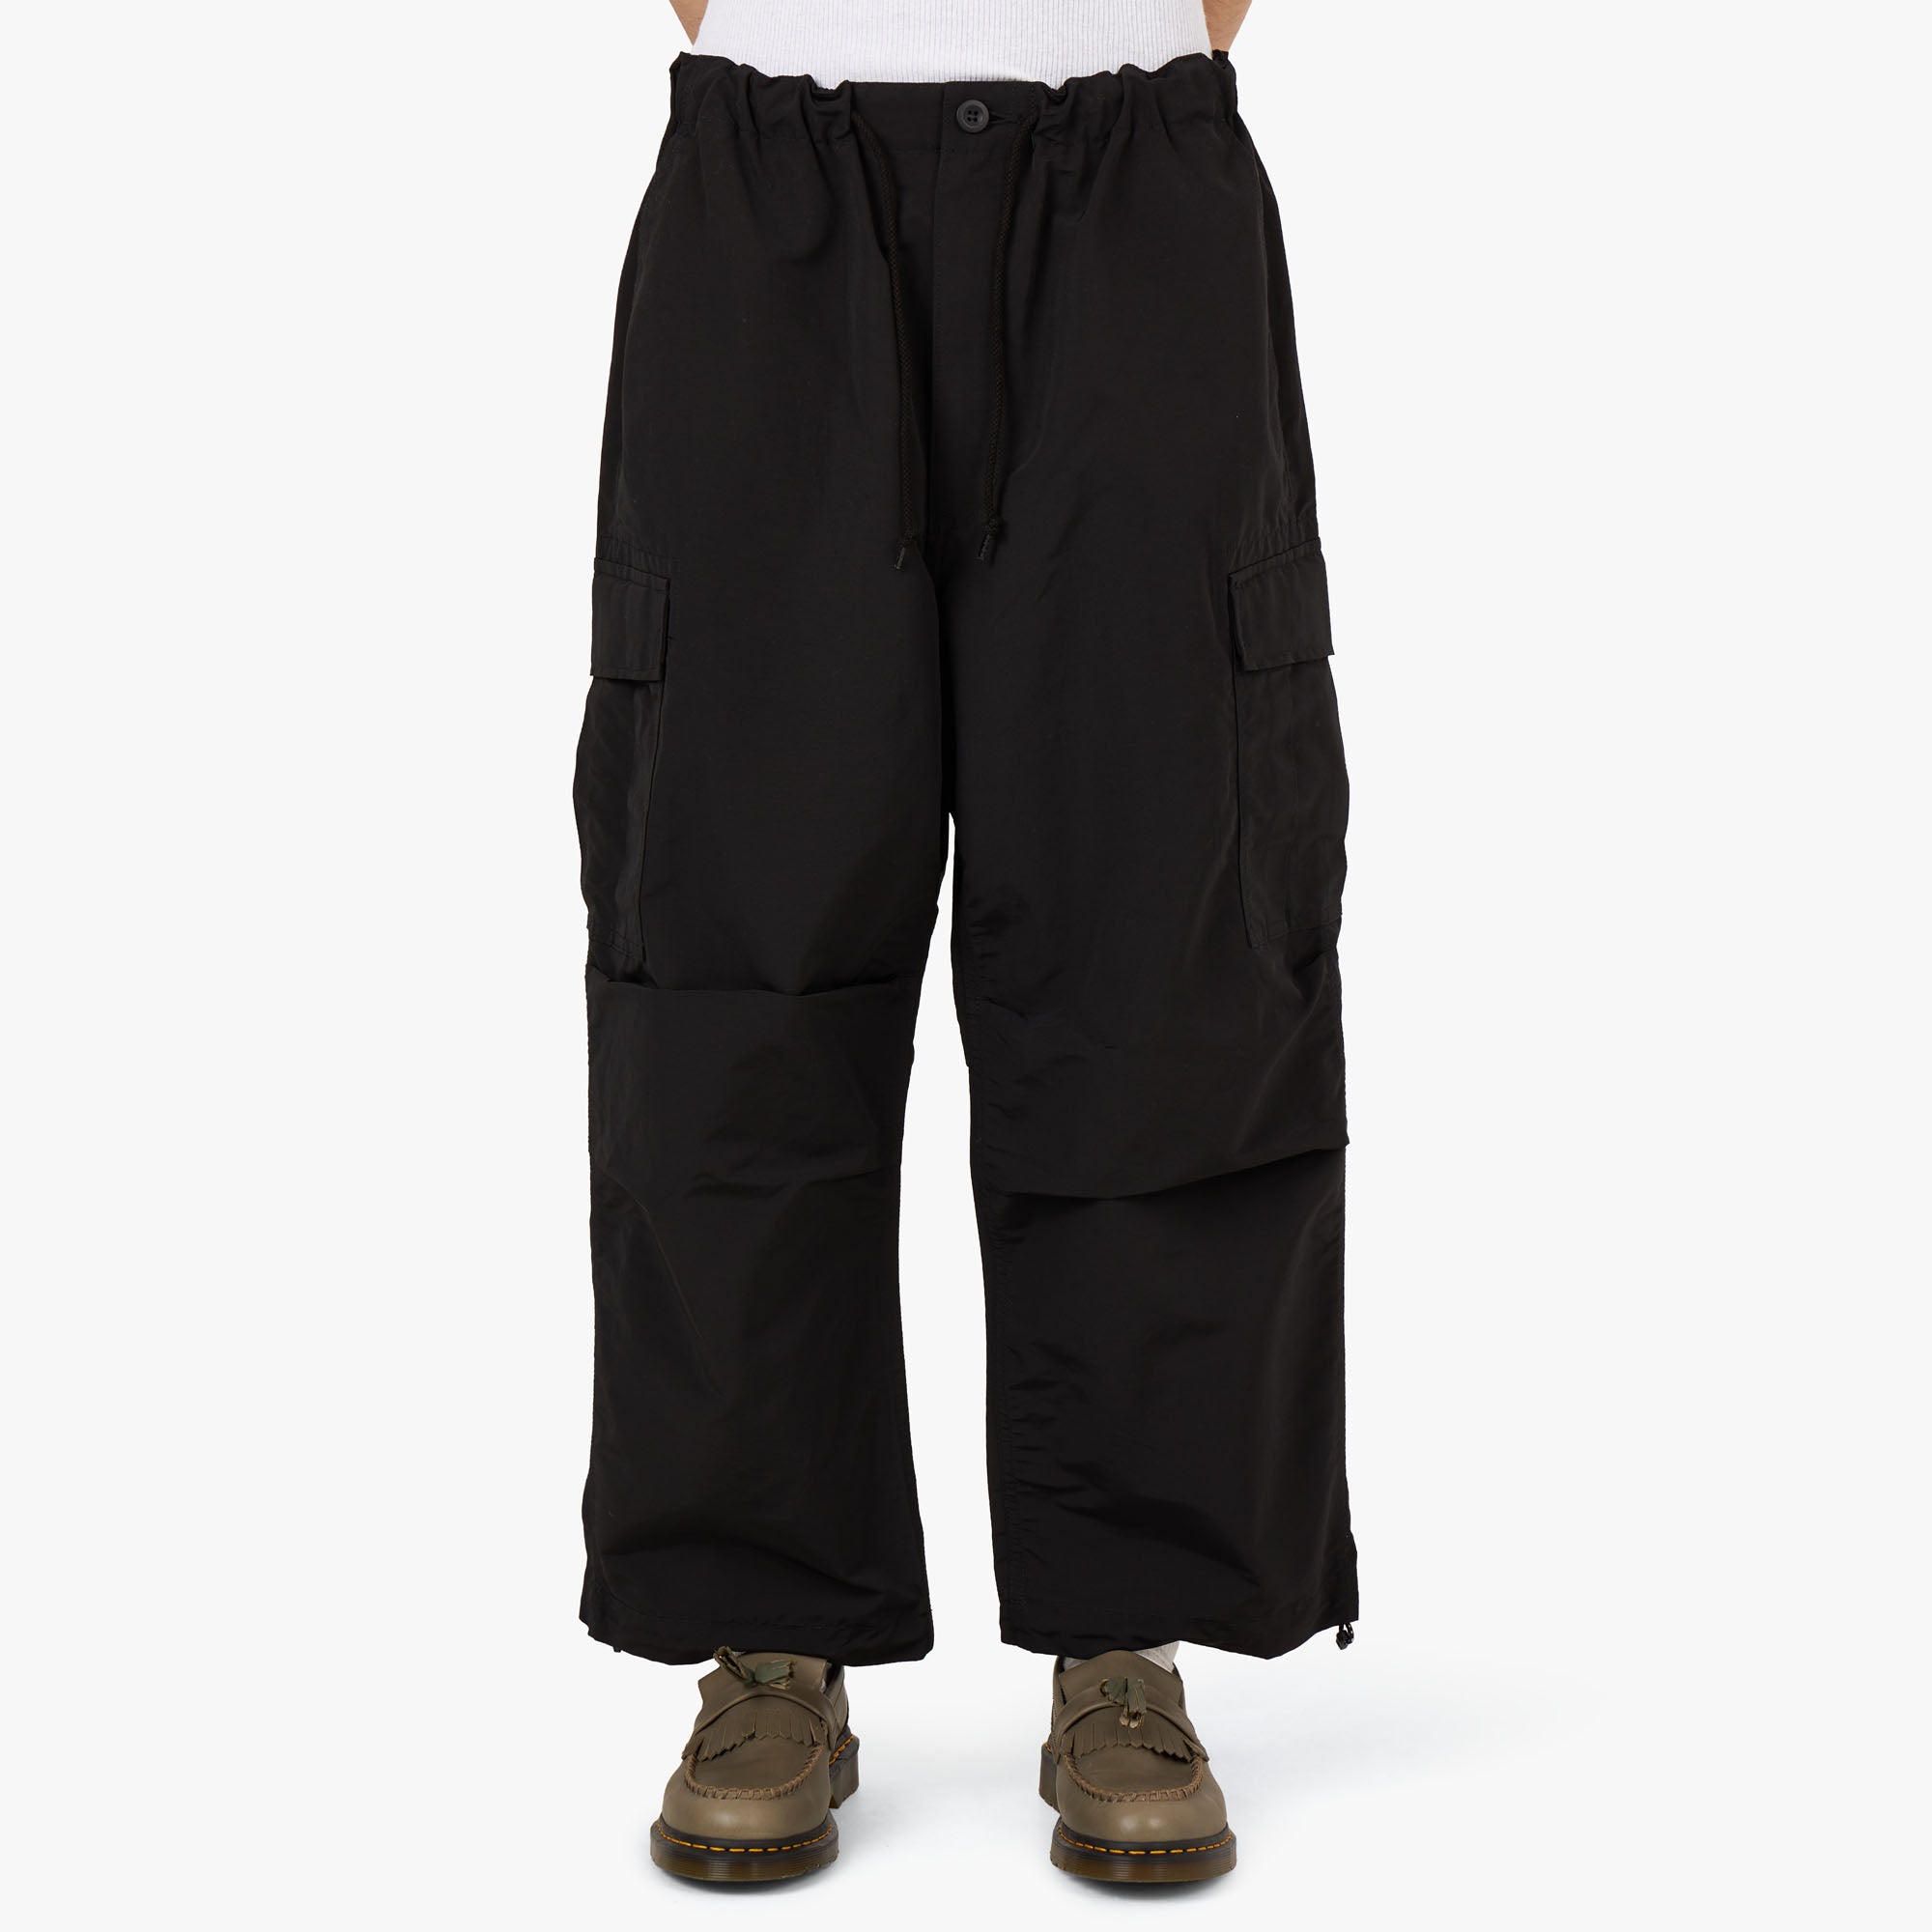 Casual Comfy Pants- Black Polyester – The Silver Strawberry